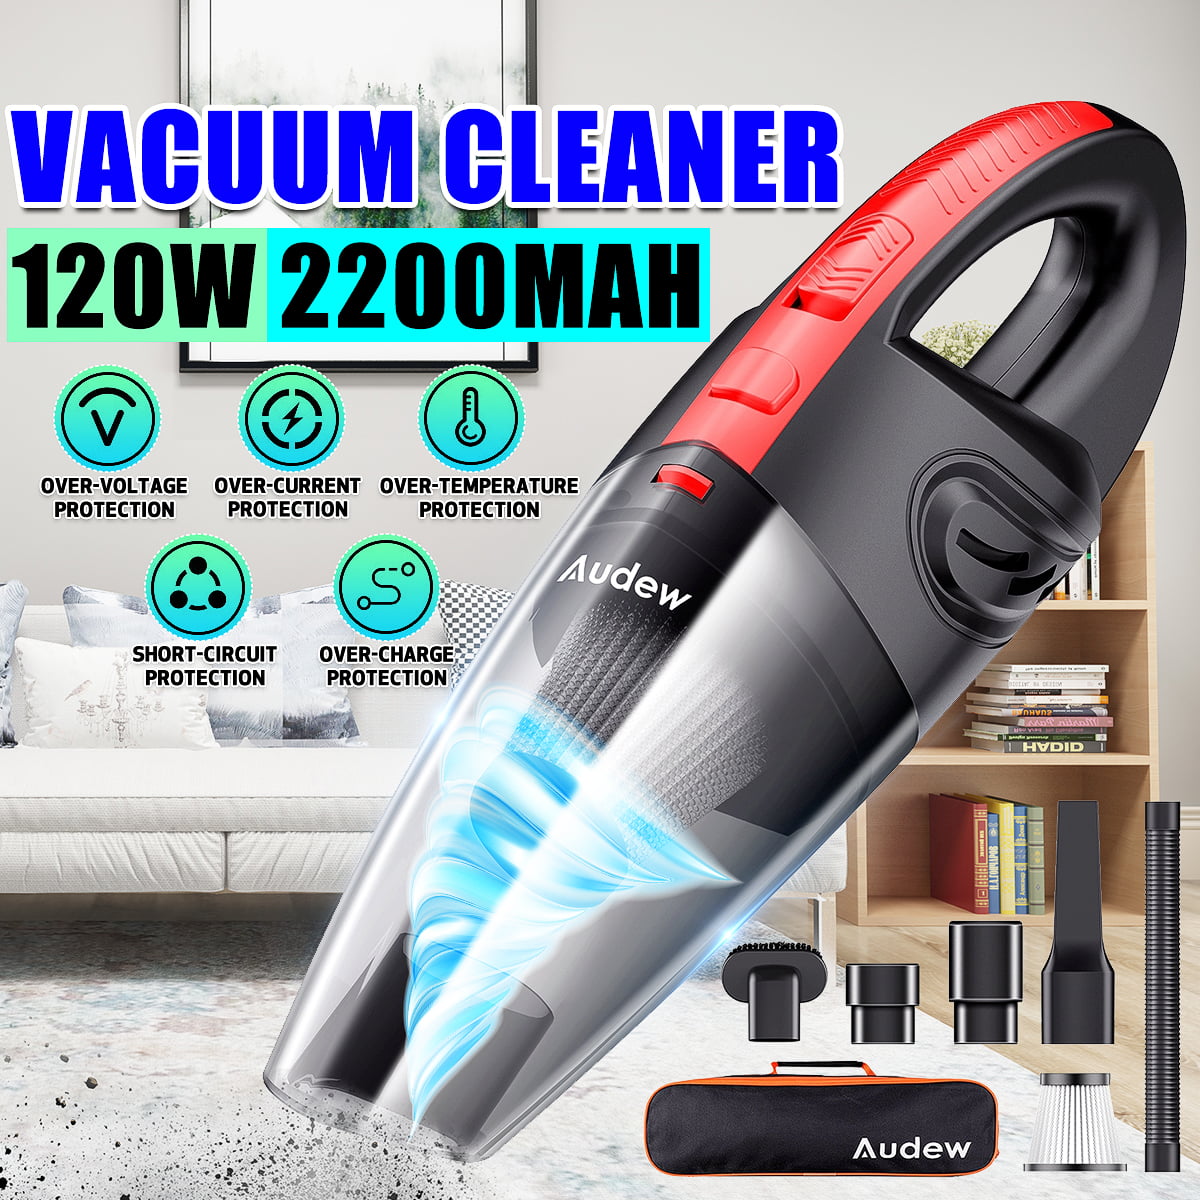 Cordless Portable Handheld Car Vacuum Cleaner 5000pa Wireless Auto Home Wet Dry 